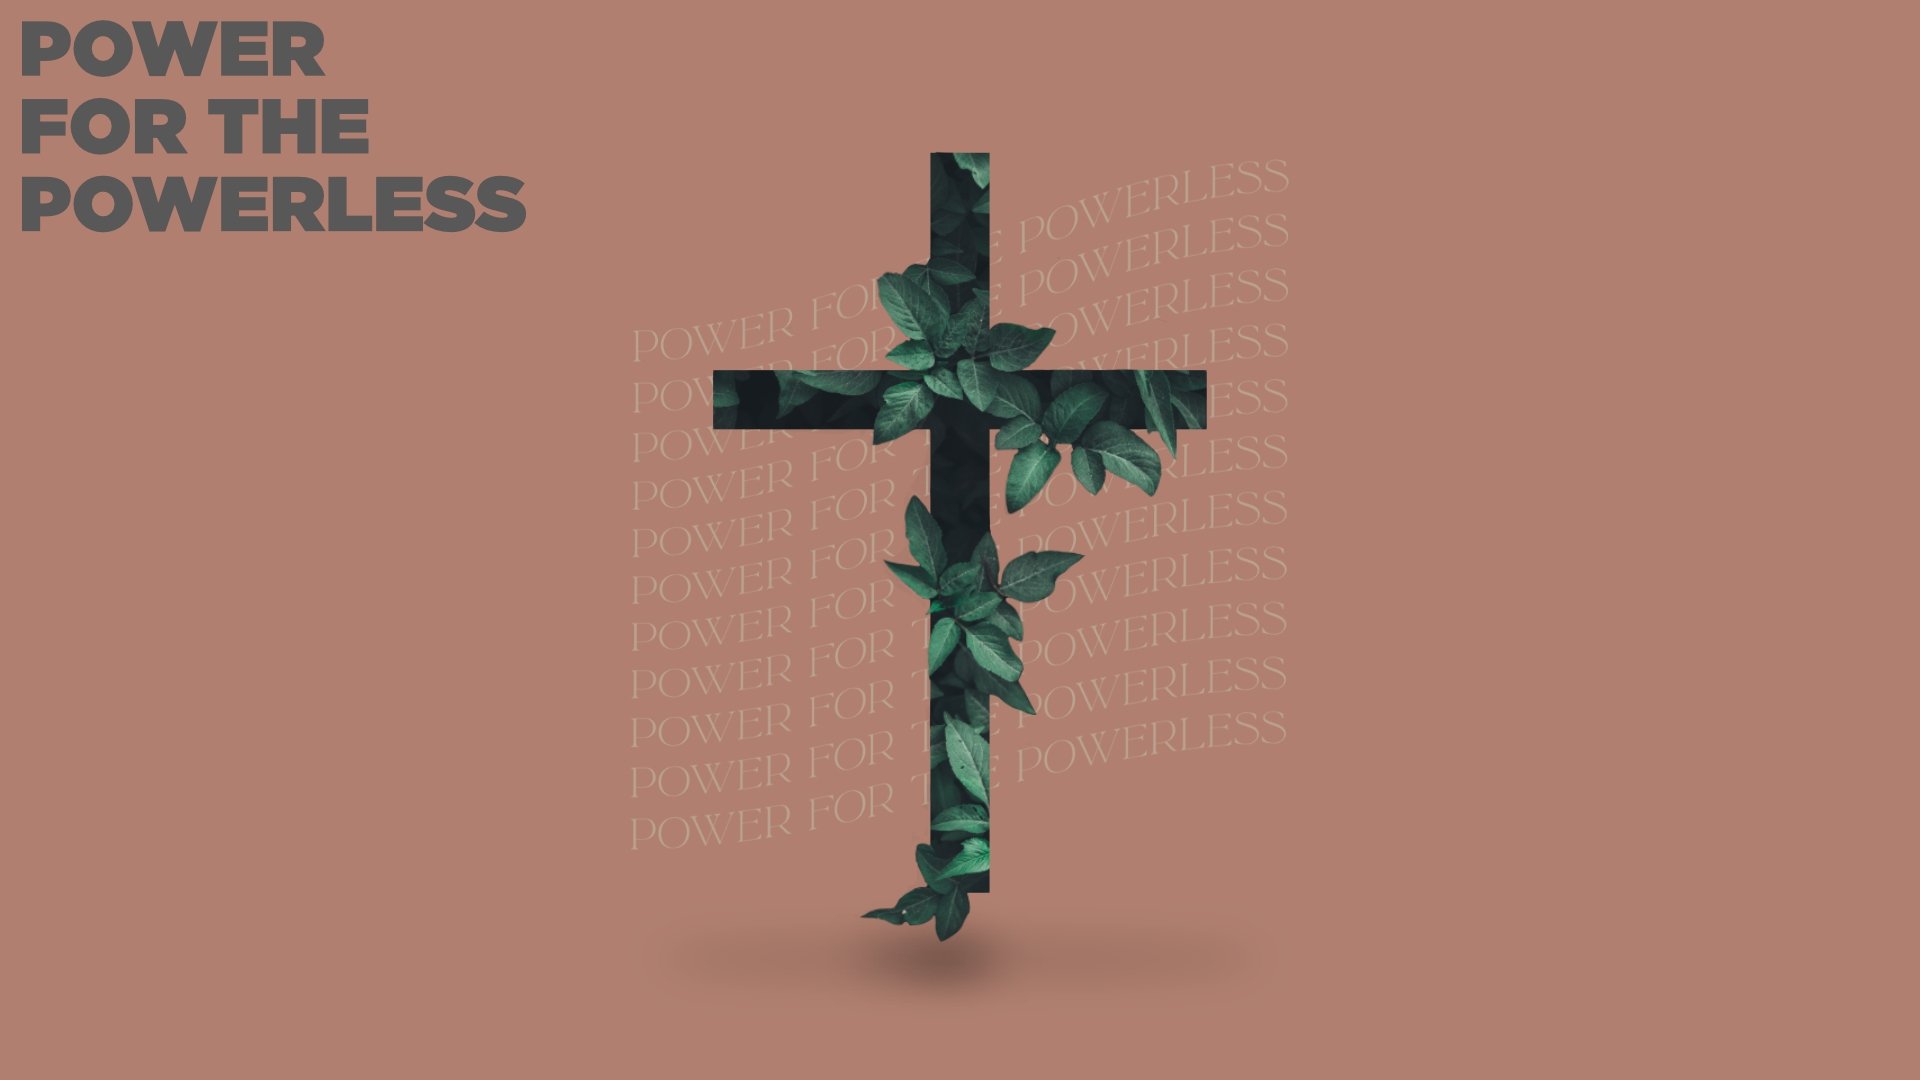 POWER FOR THE POWERLESS SERMON TITLE GRAPHIC.jpg